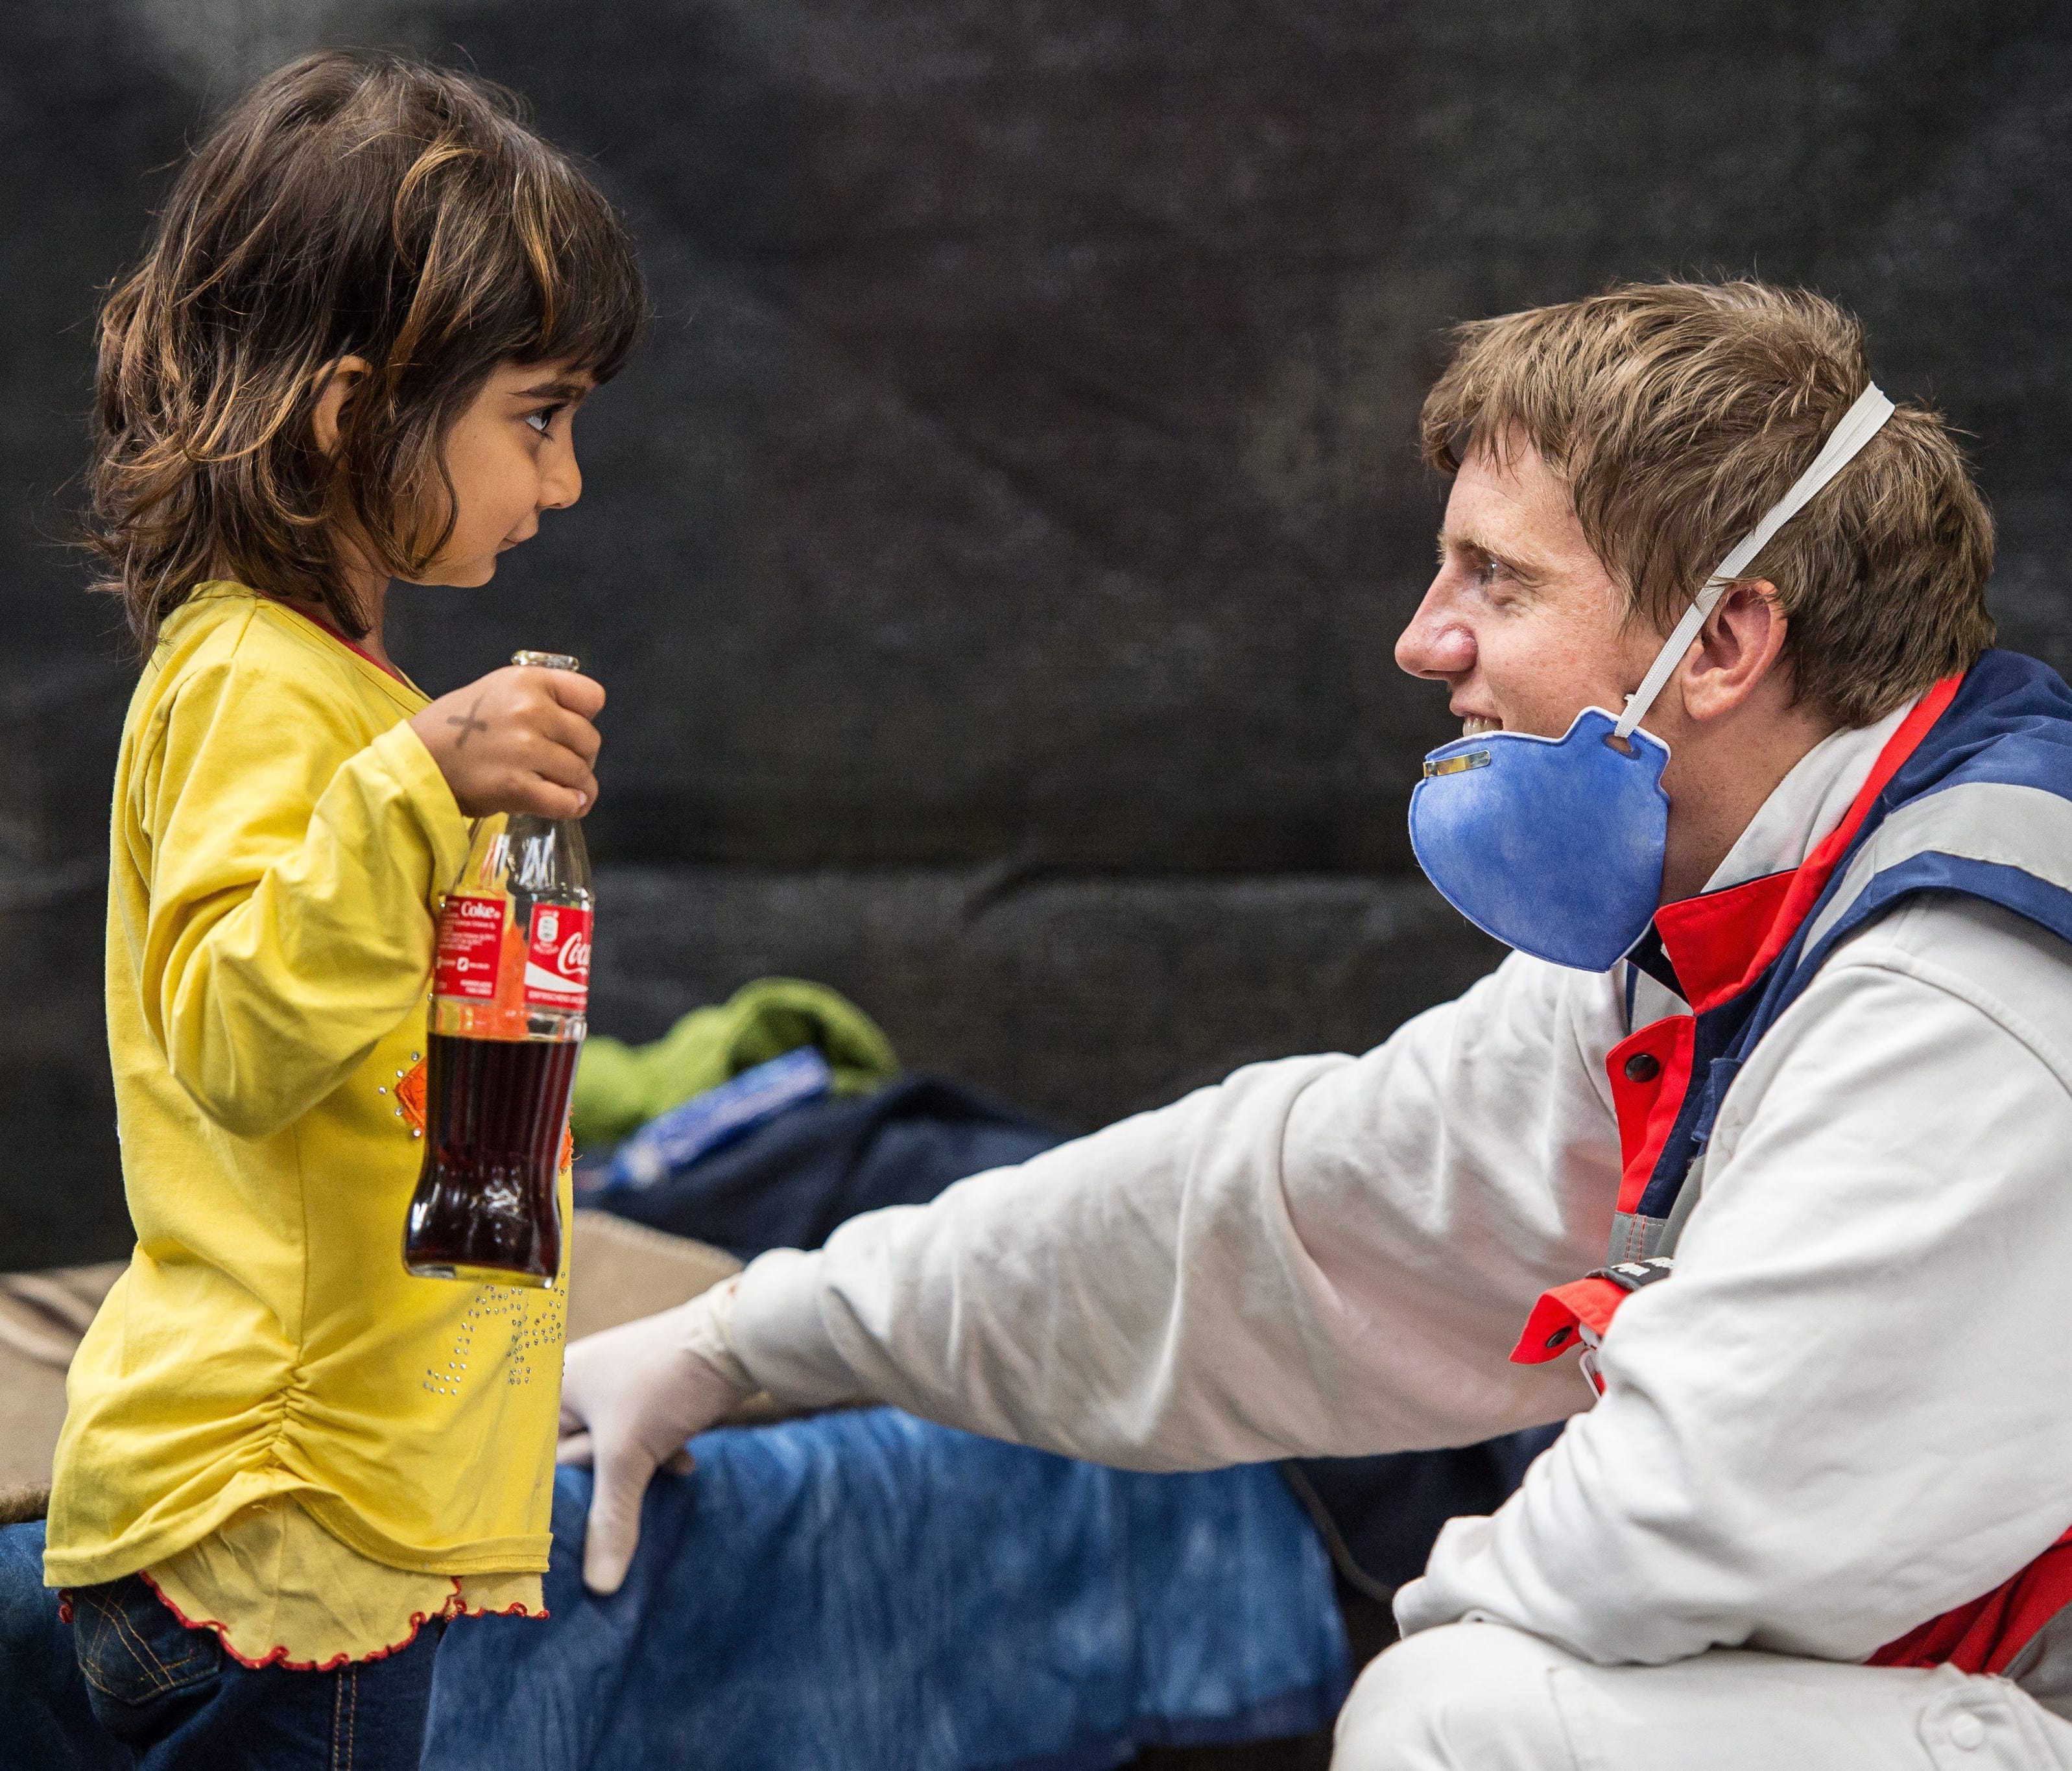 A volunteer from the German Red Cross plays with Zena, a little girl from Syria, in an emergerncy shelter in Rottenburg, Germany, on Sept. 16, 2015.